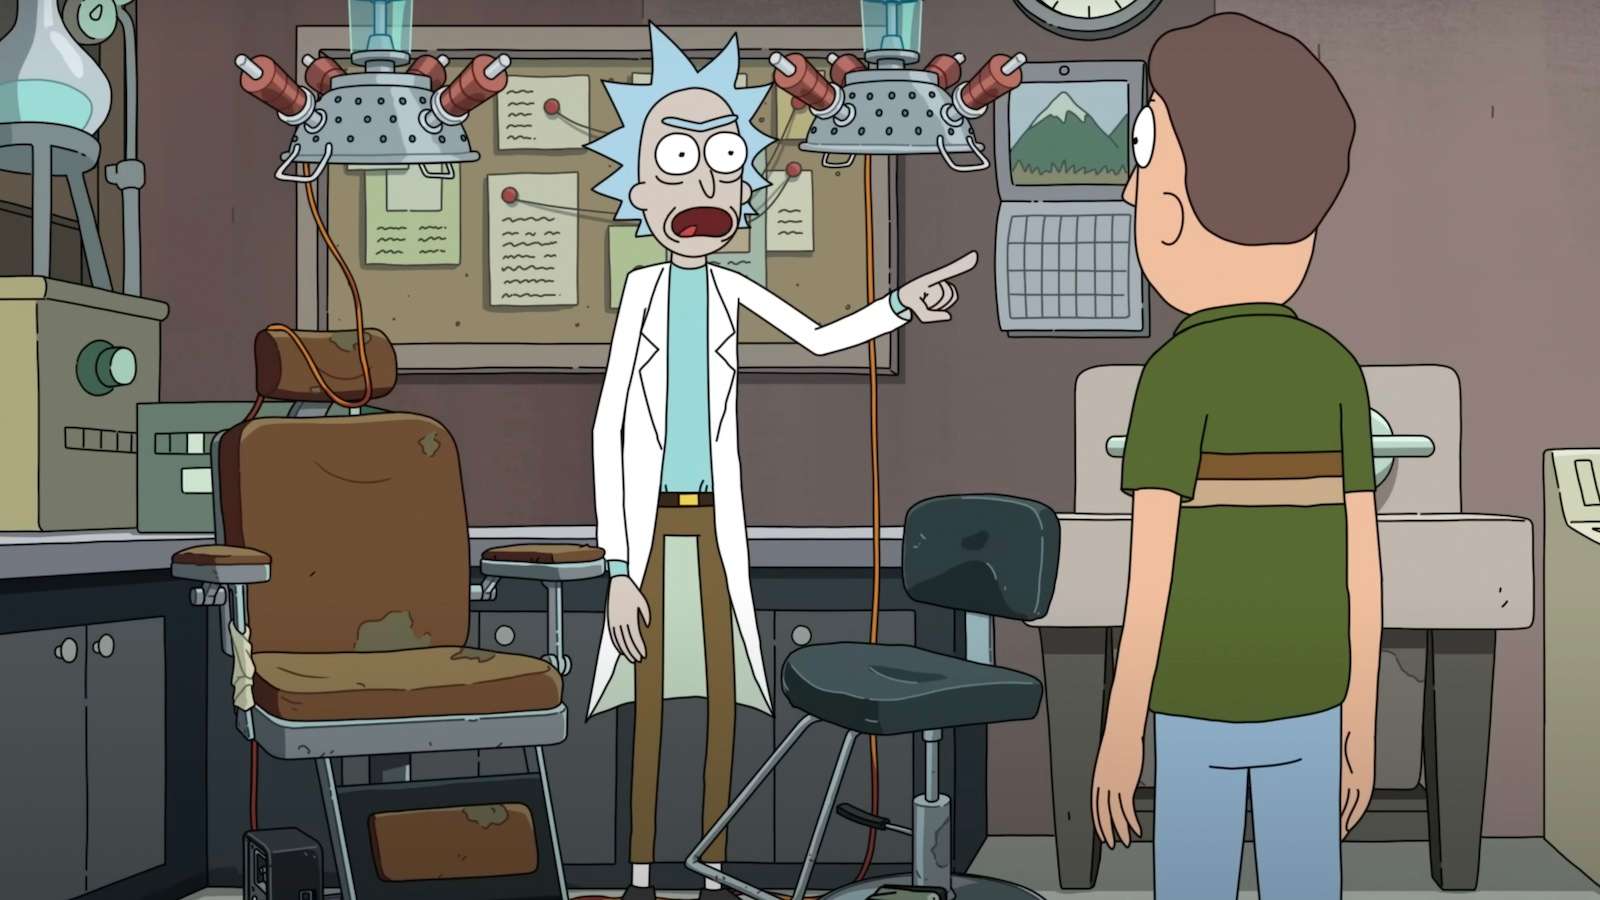 Rick and Jerry in Rick and Morty Season 7 Episode 2